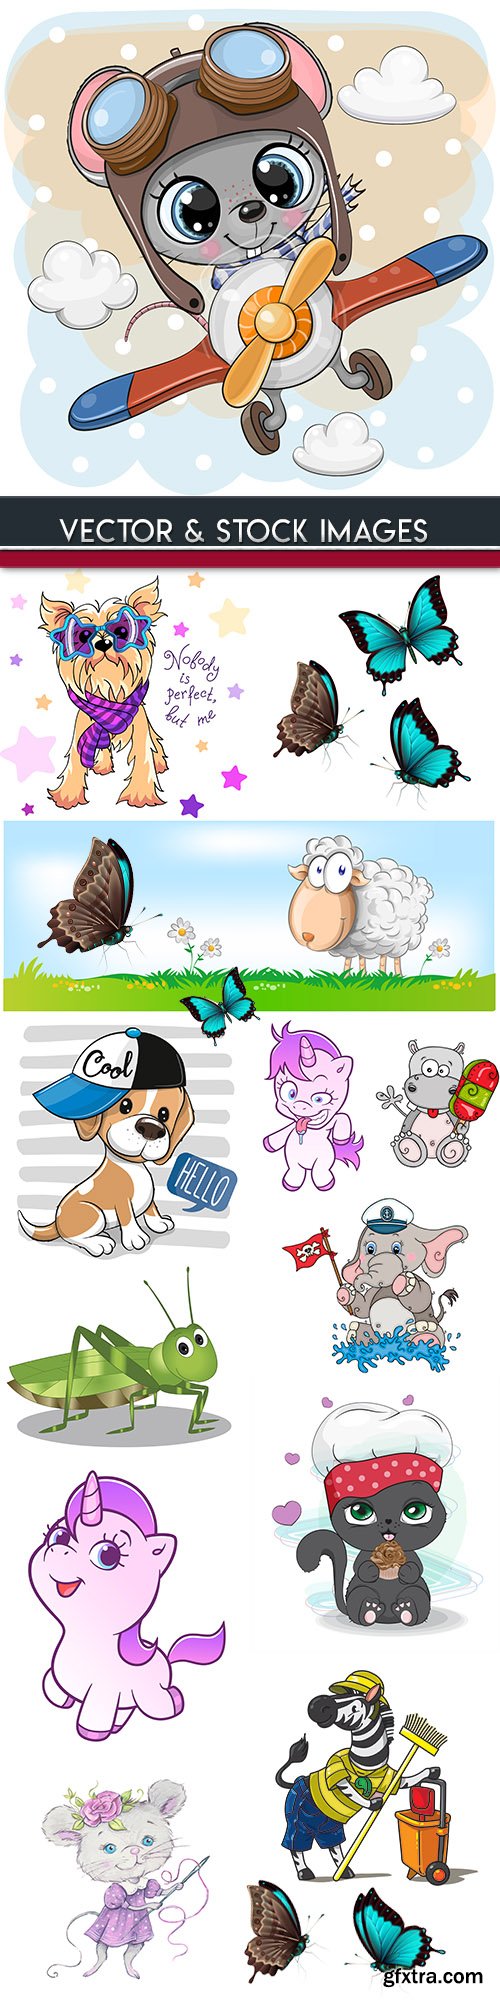 Funny animal collection of children \'s illustrations